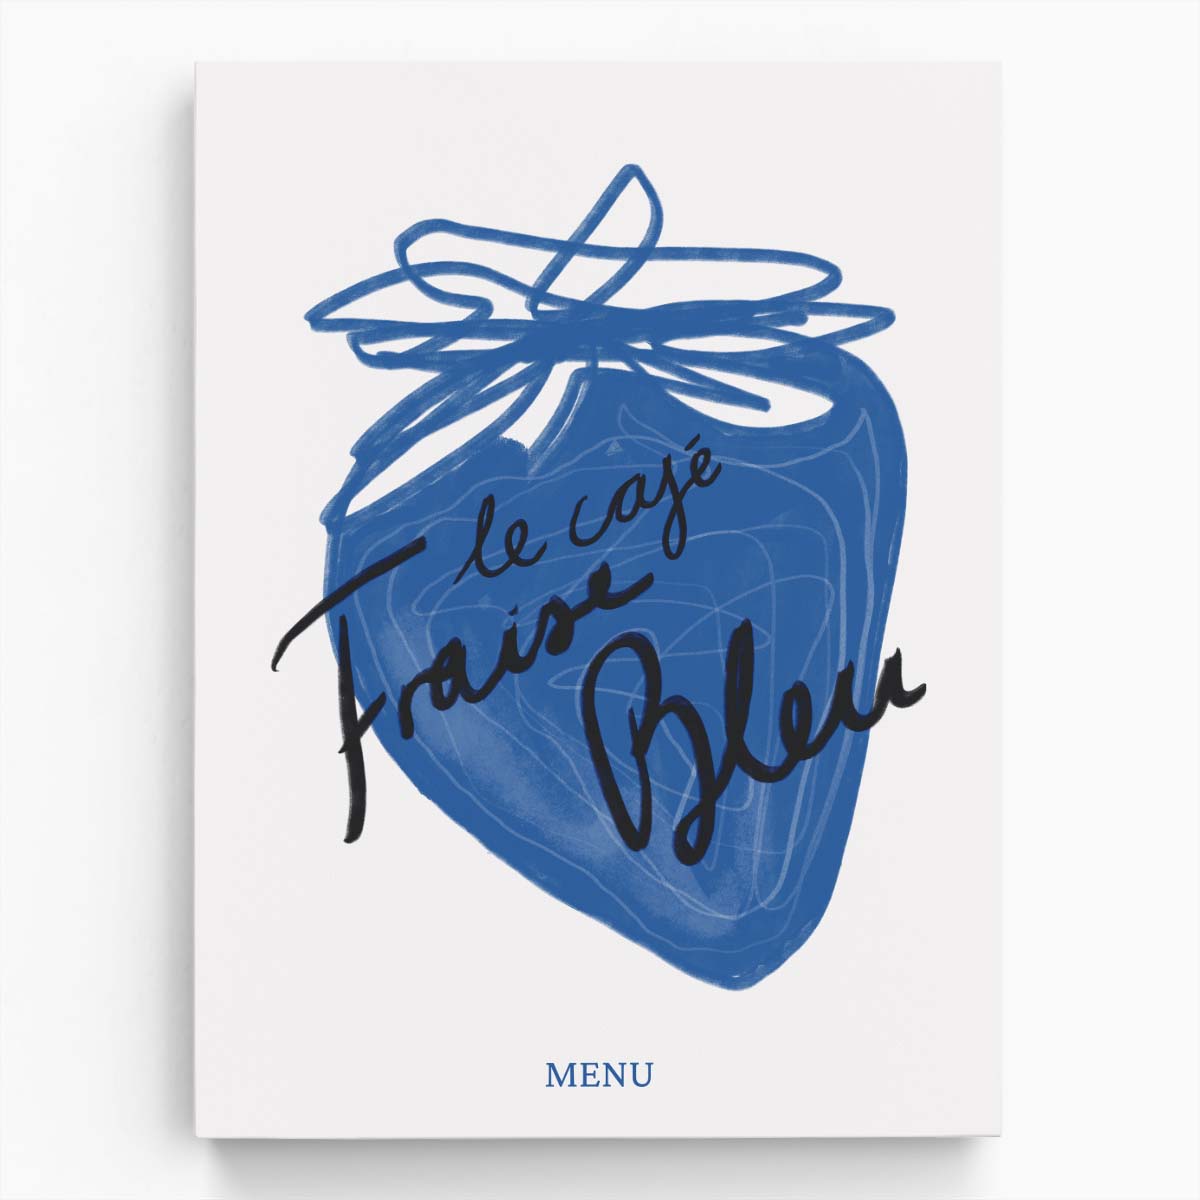 Blue Strawberry Cafe Illustration - Bright Kitchen Food Art by Luxuriance Designs, made in USA